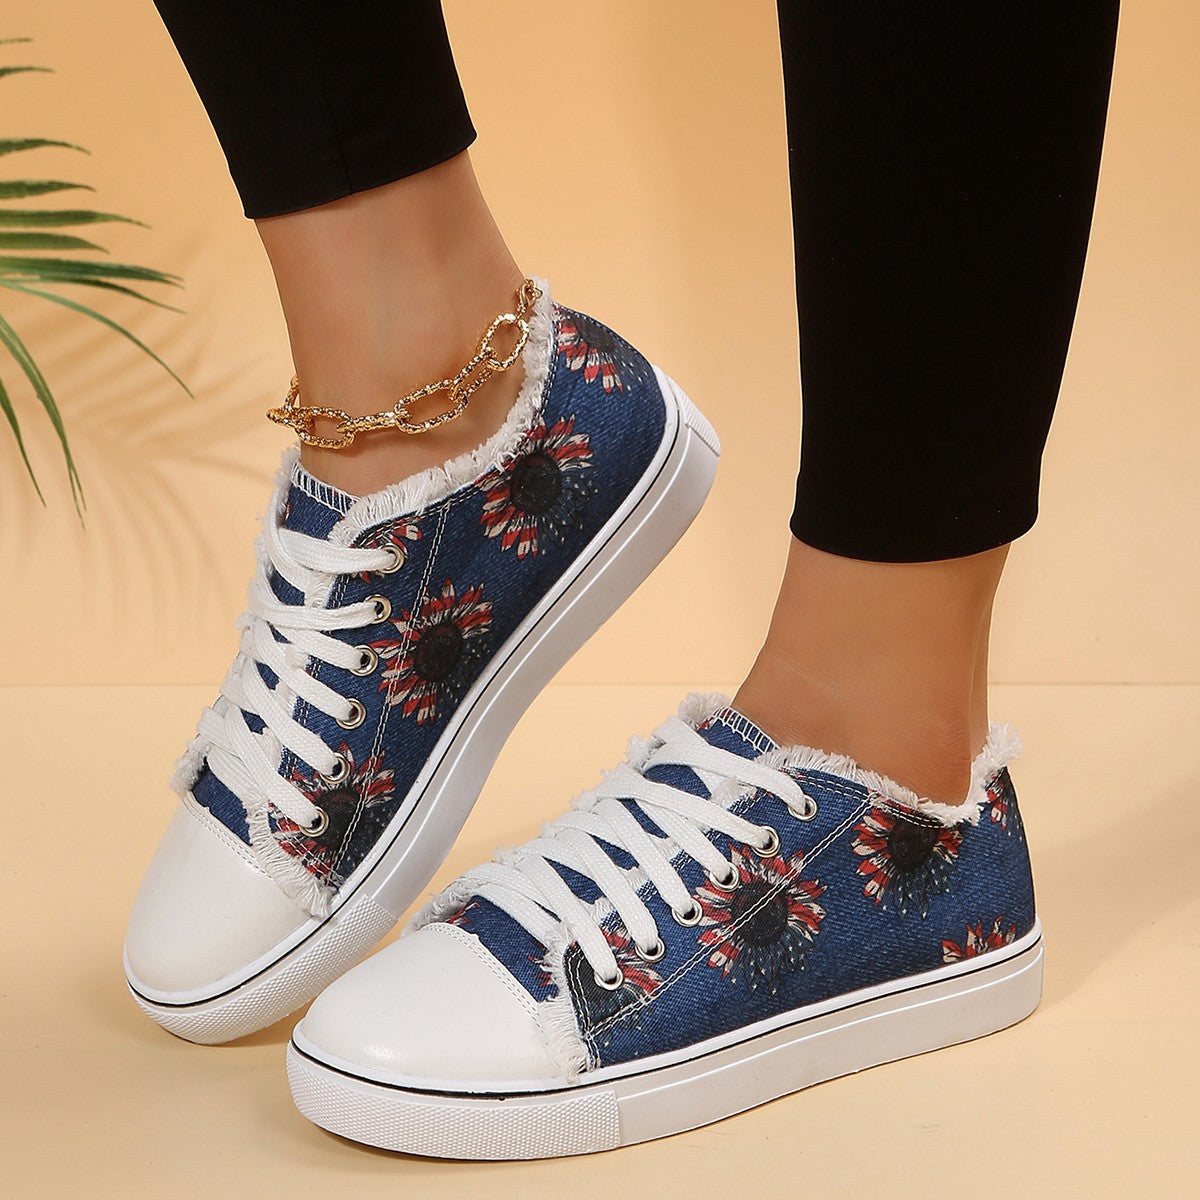 Trainers & Sneakers  | Casual Flat Canvas Shoes Flowers Lace-up Flowers Print Loafers Women Walking Shoes | Denim Jellyfish |  36.| thecurvestory.myshopify.com